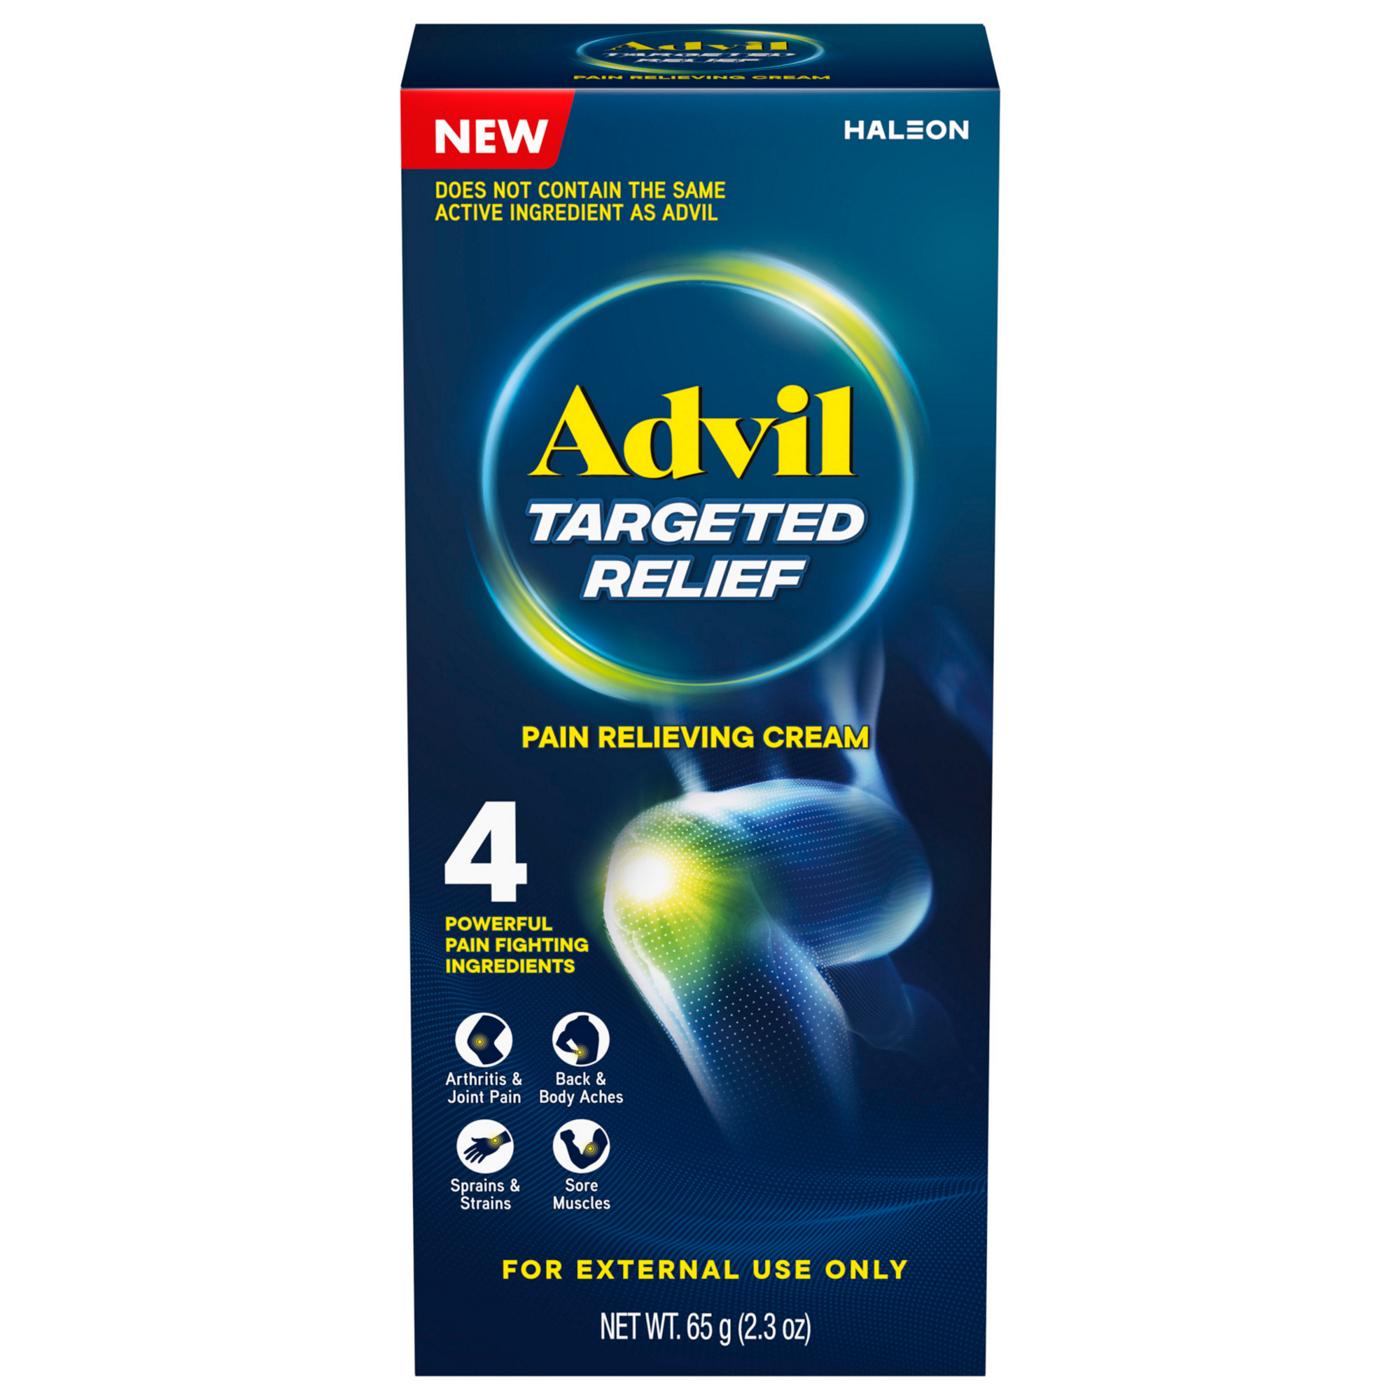 Advil Targeted Relief Pain Relieving Cream; image 1 of 4